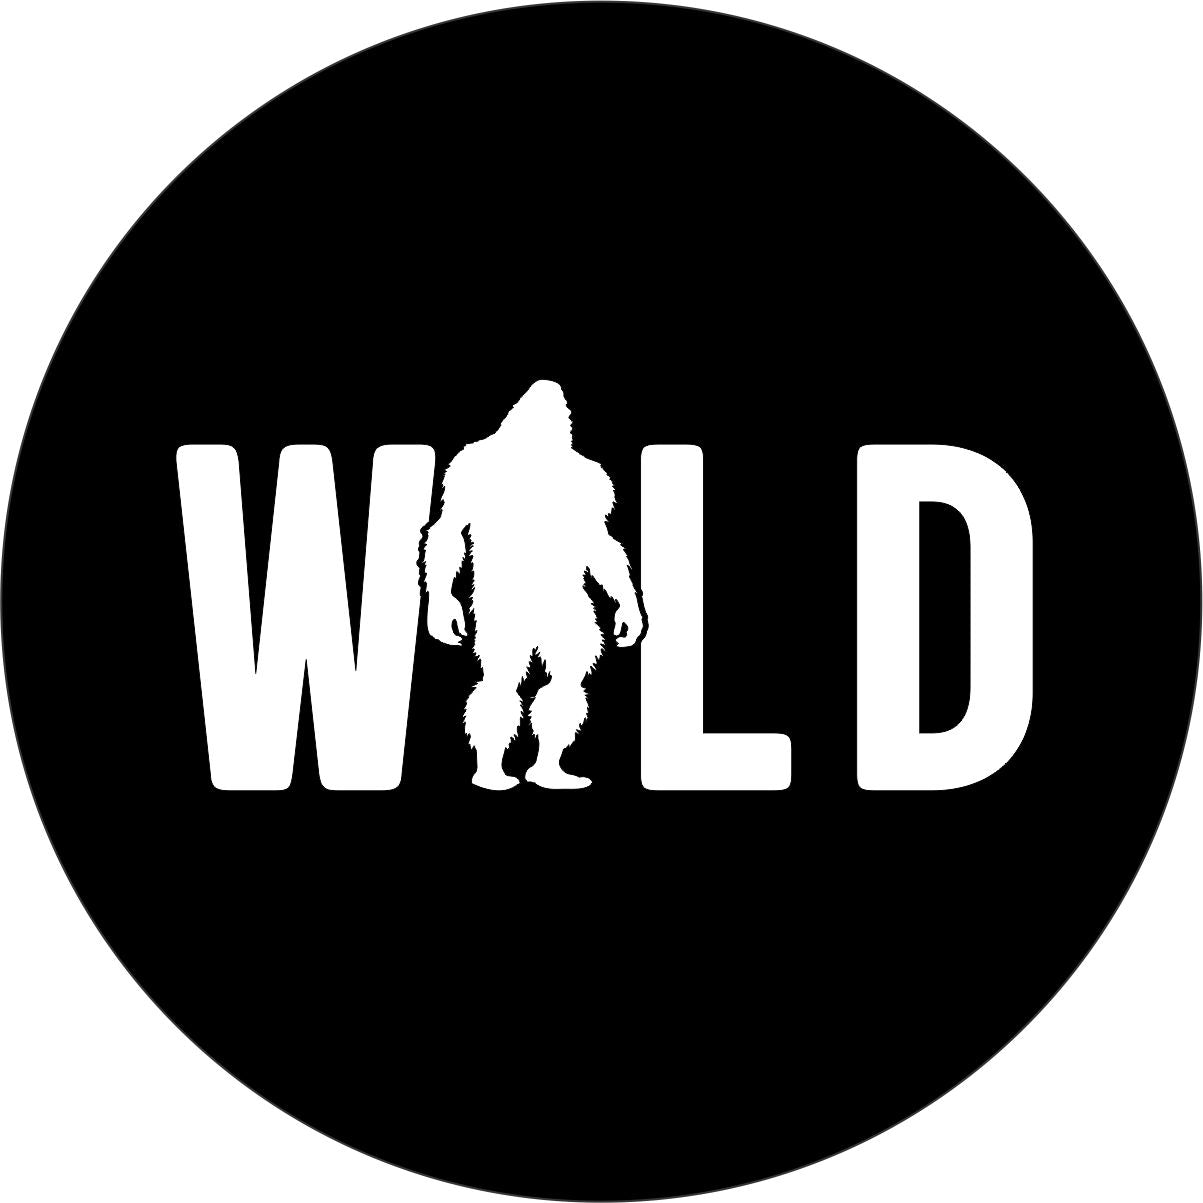 Black vinyl spare tire cover with white letters that say WILD, but with a silhouette of sasquatch replacing the I design. 